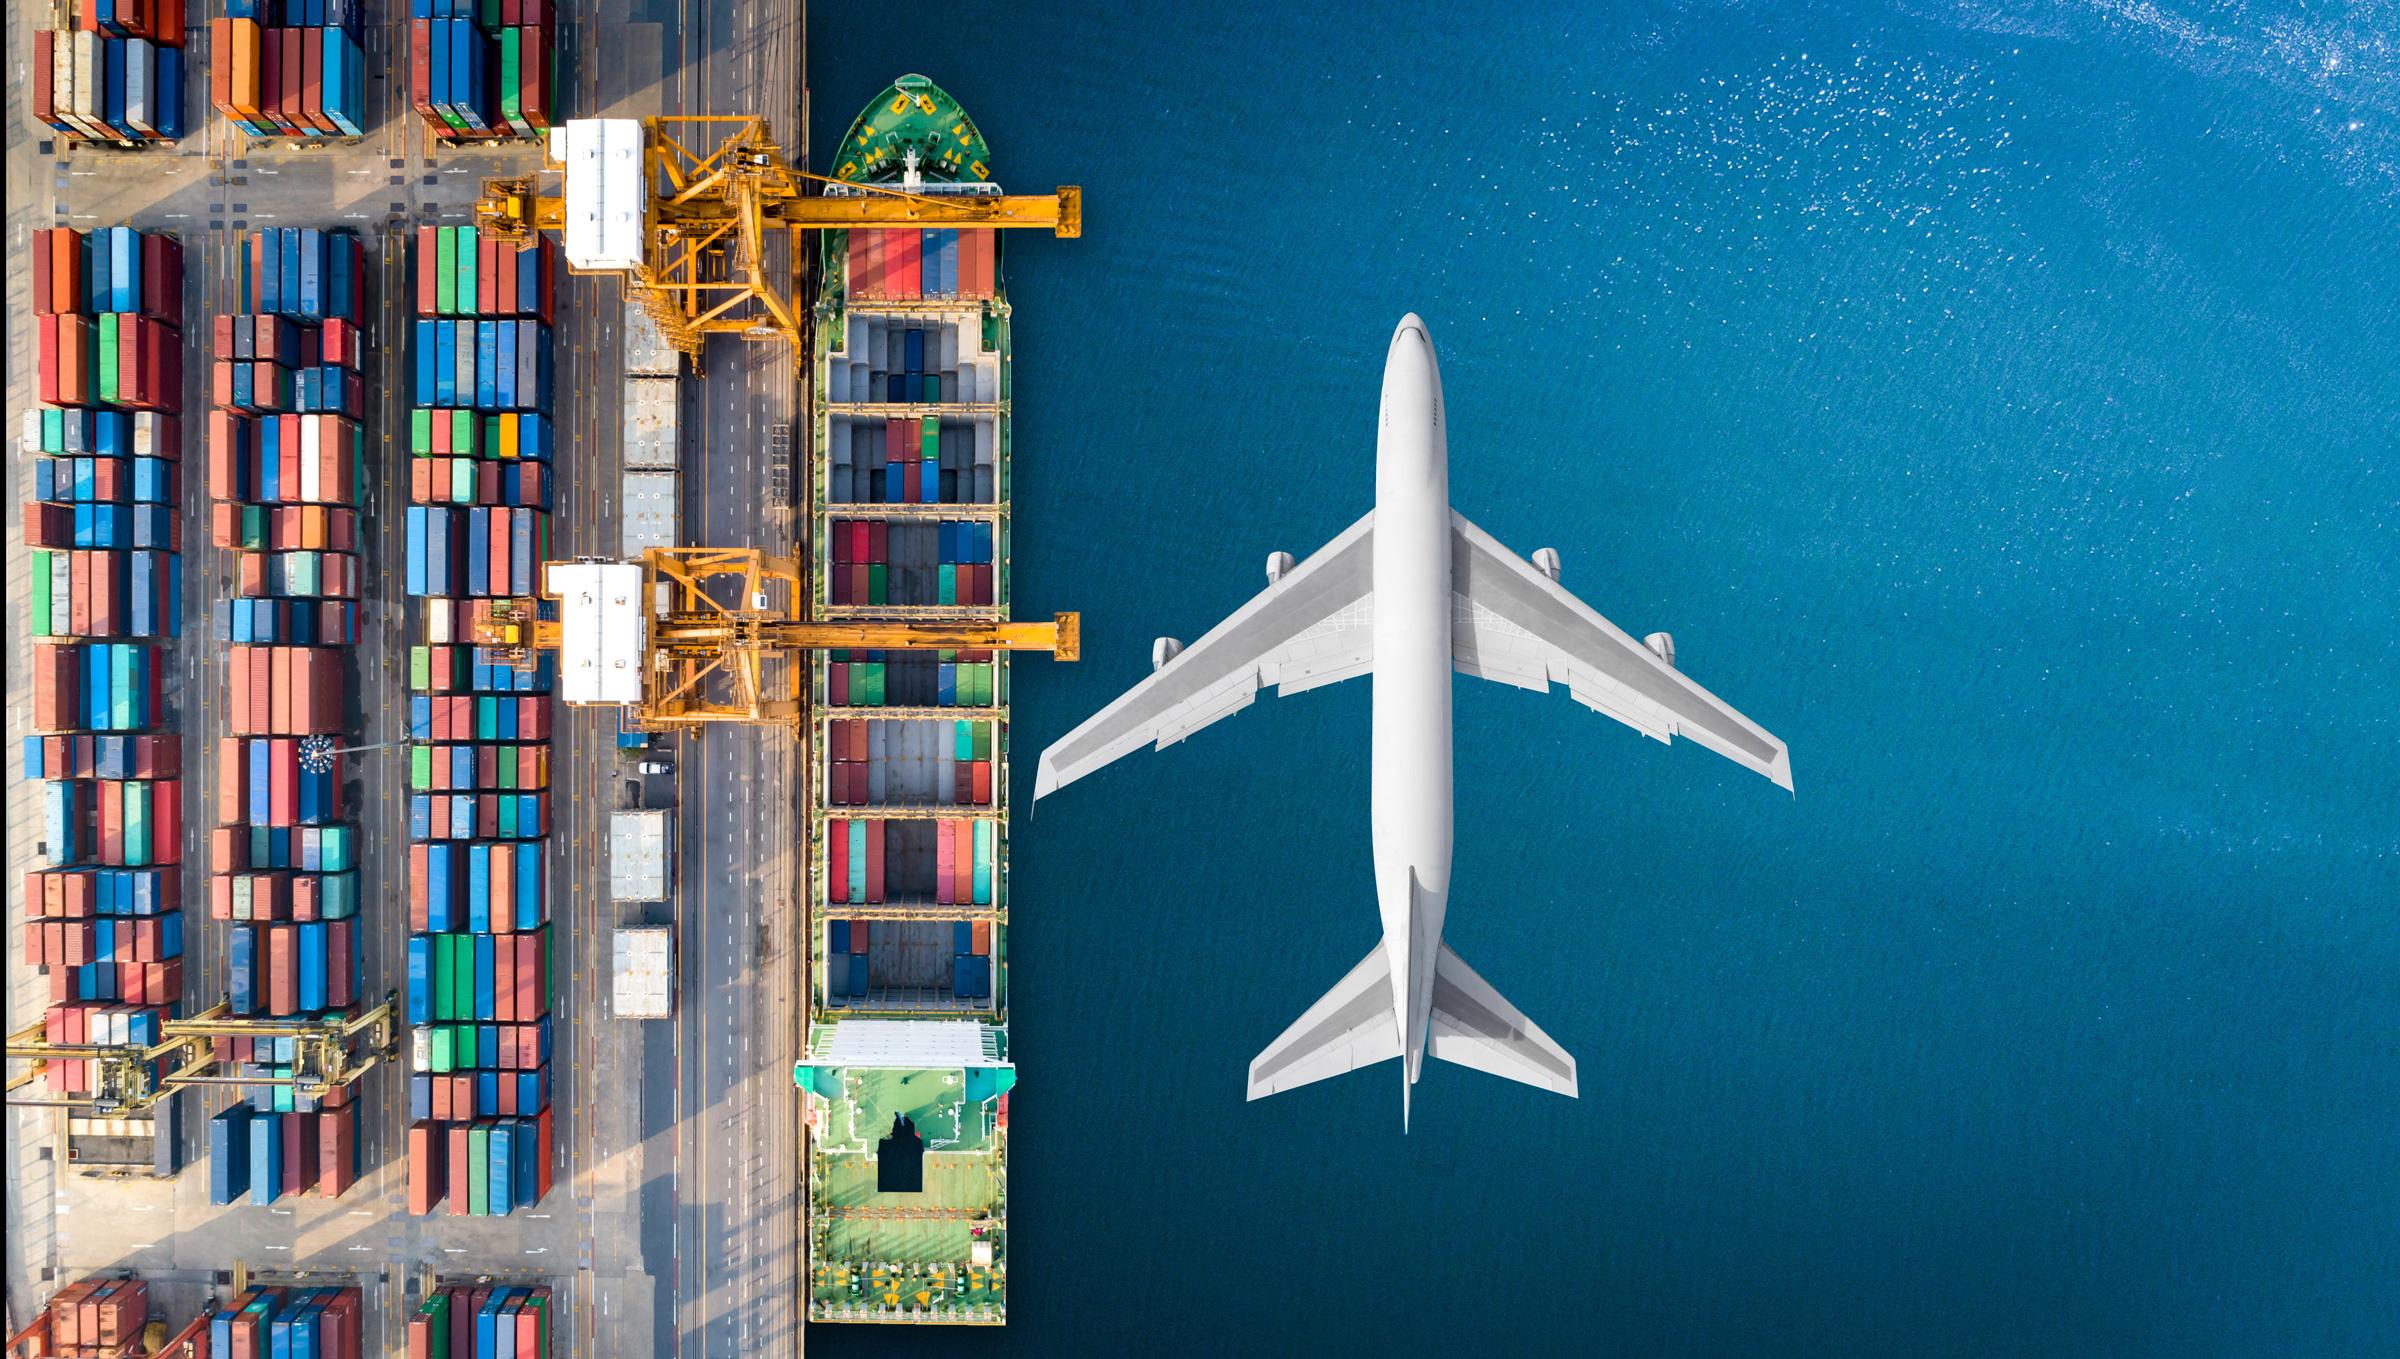 View of cargo containers, a container ship, and an airplane by the ocean, symbolizing multiple modes of international transportation.